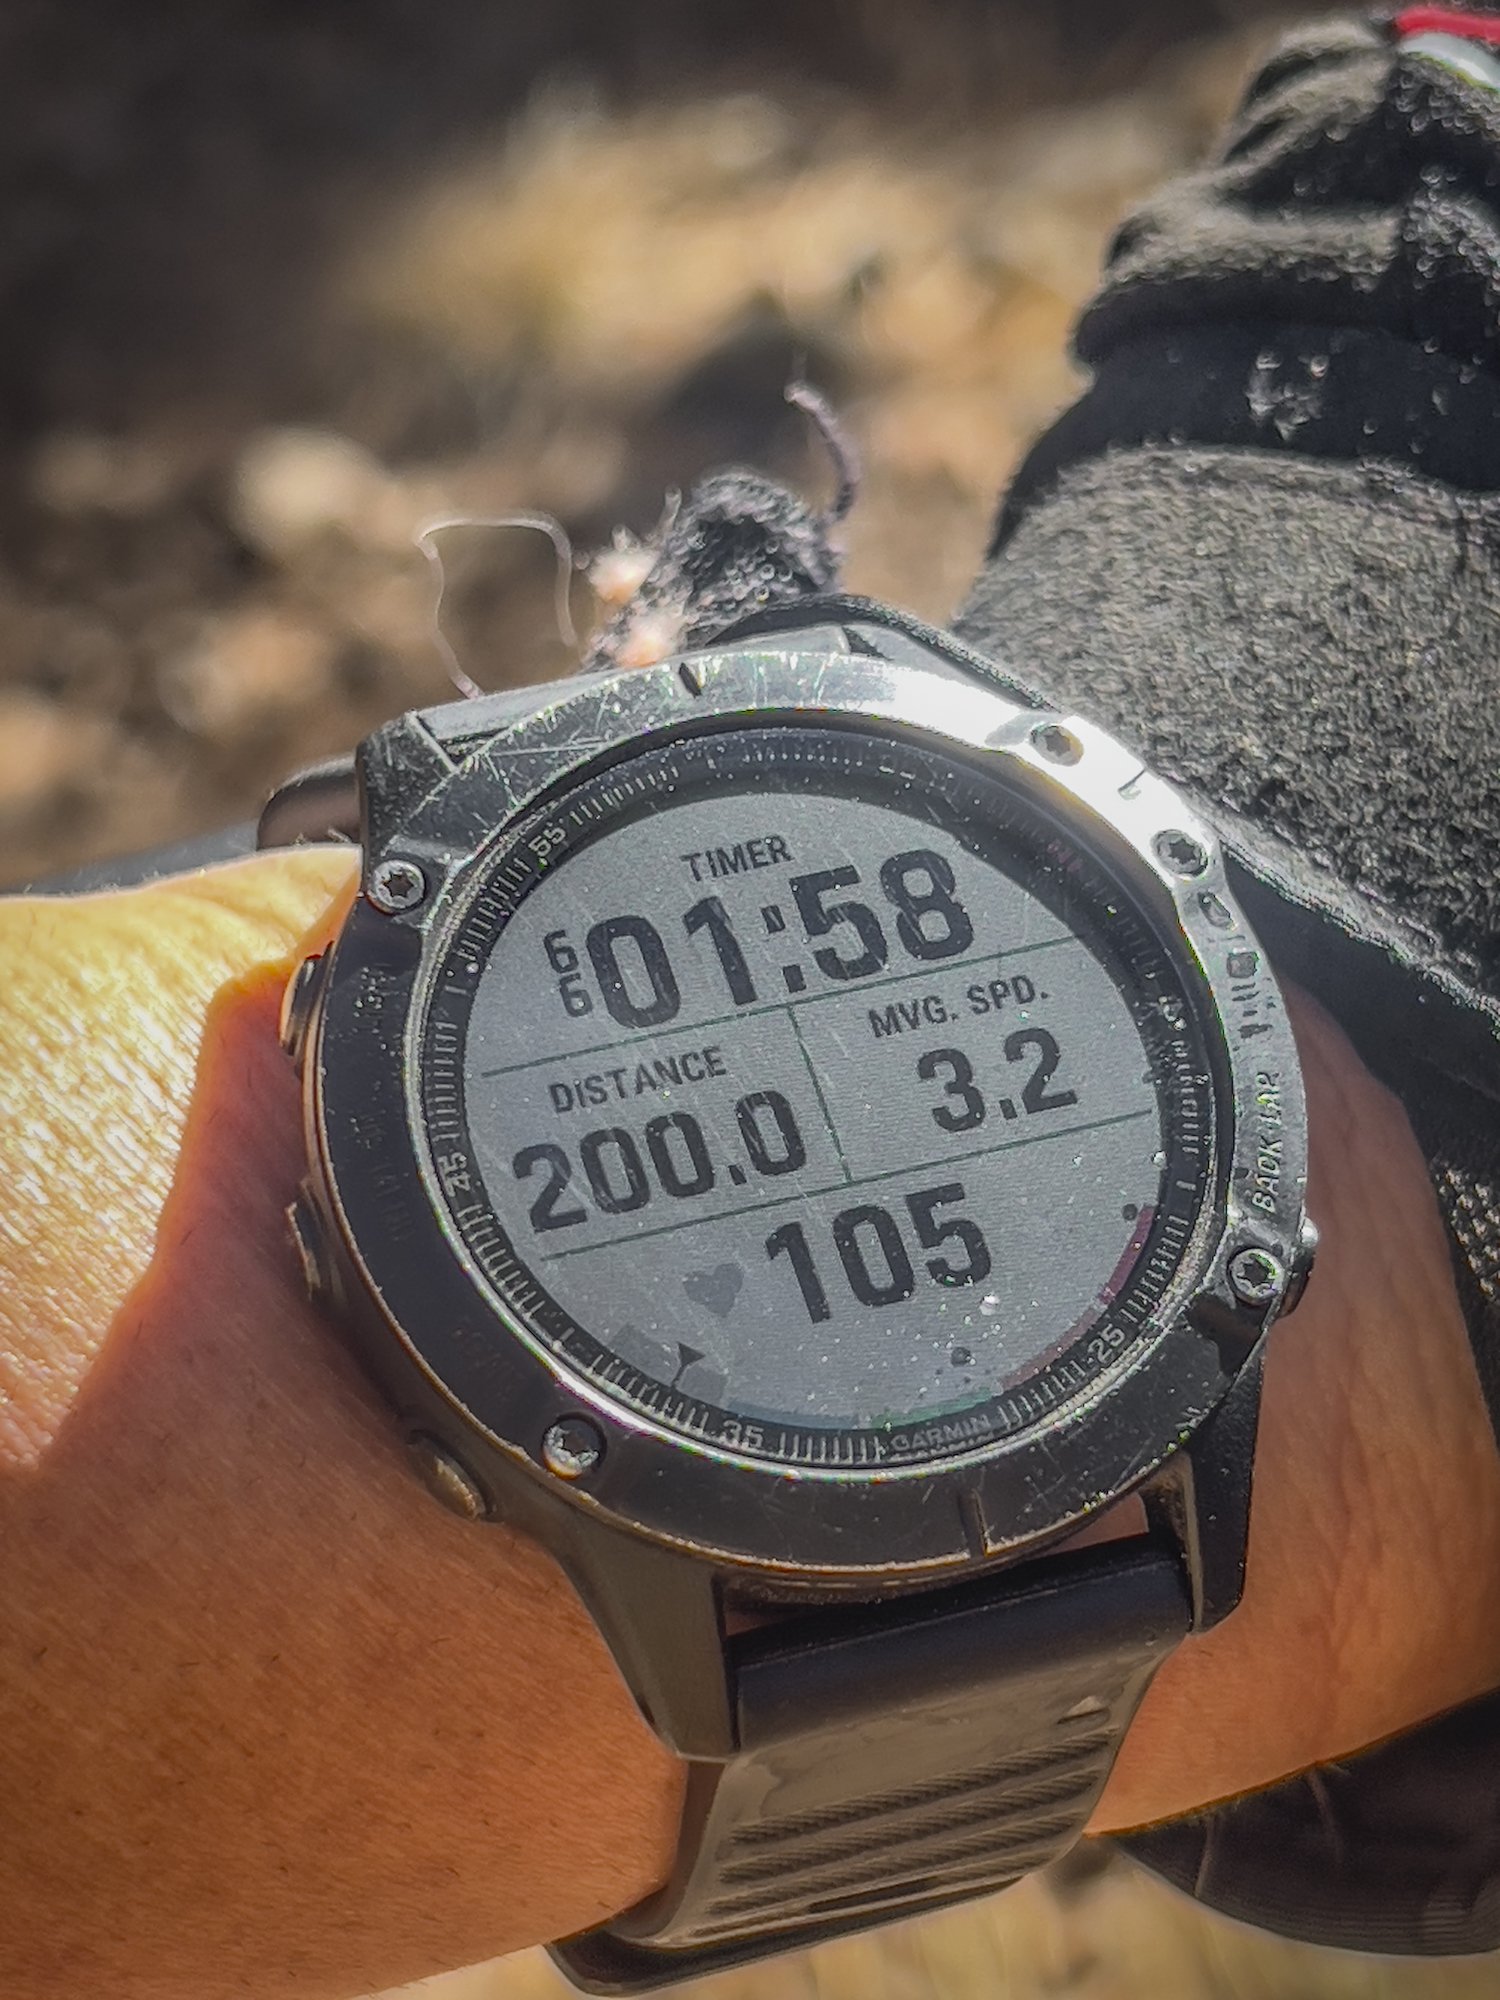  Milestone.  My watch was ~5 miles (?) ahead of the actual trail miles by that point, but still…  